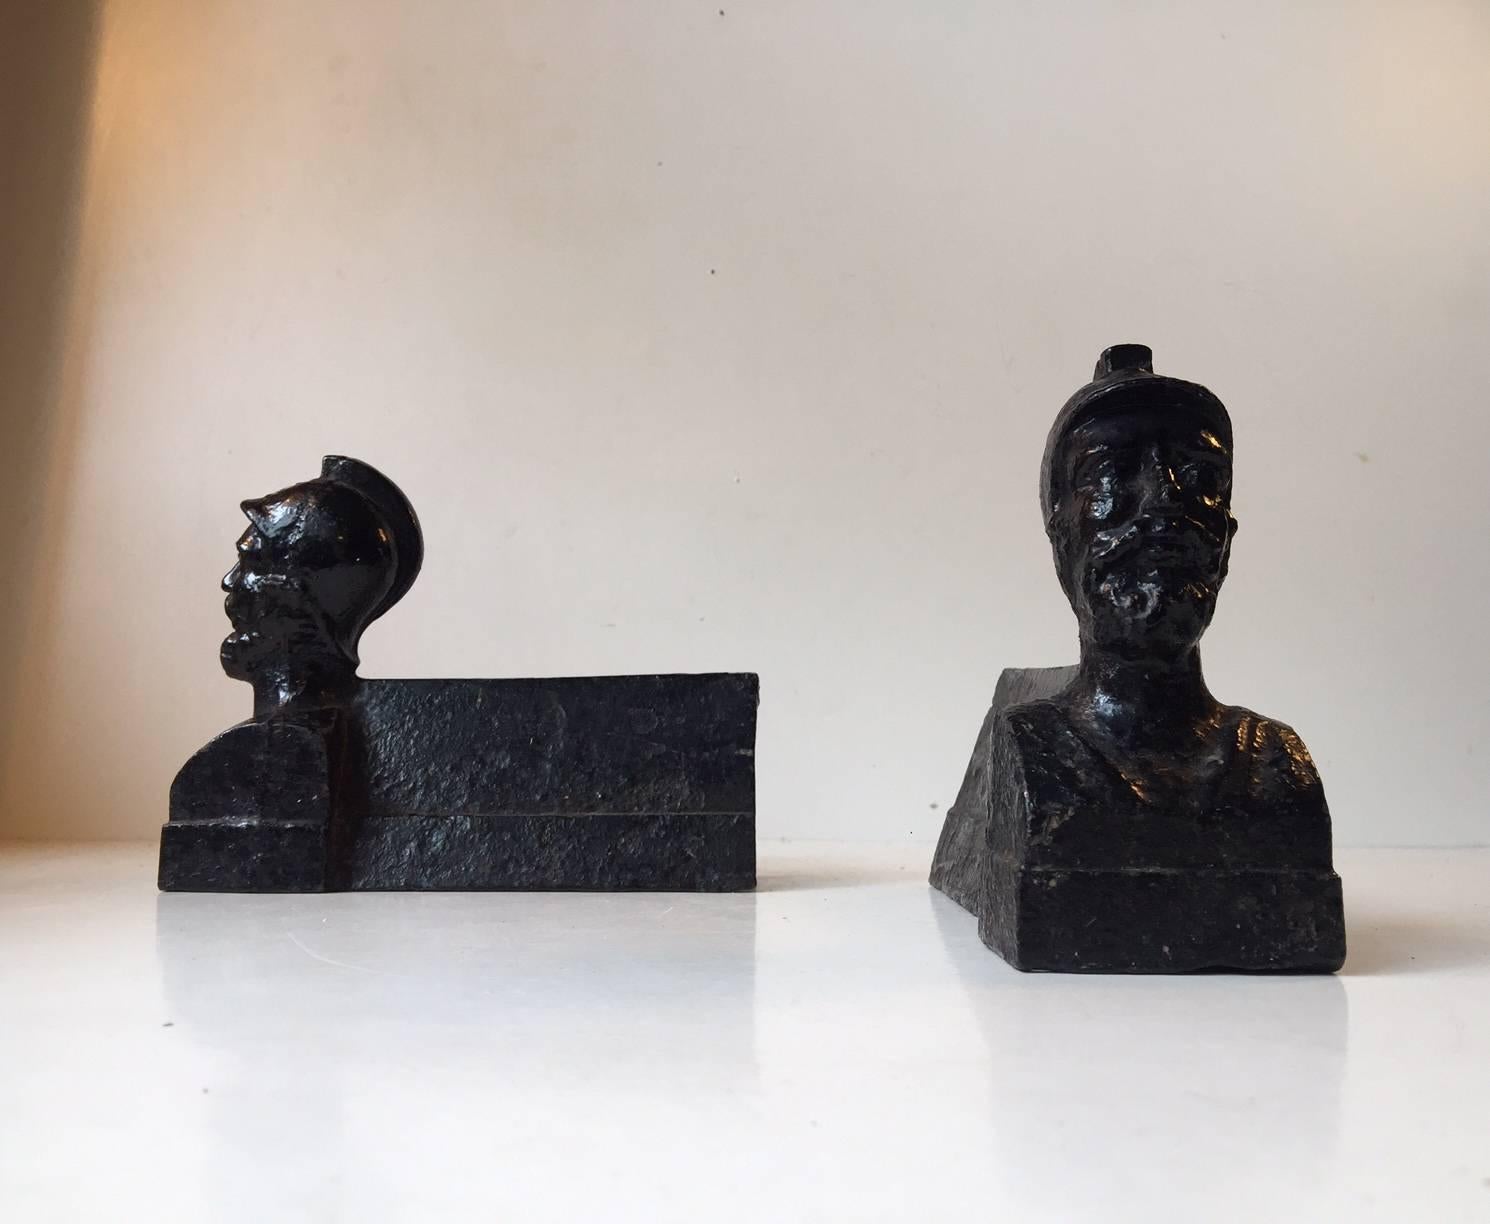 A pair of antique chenets or firedogs cast with a head and shoulders bust of a military Generals, with a straight, pyramidal billet bar. With their relatively small-scale they could be adapted for other decorative uses in the home such as bookends.